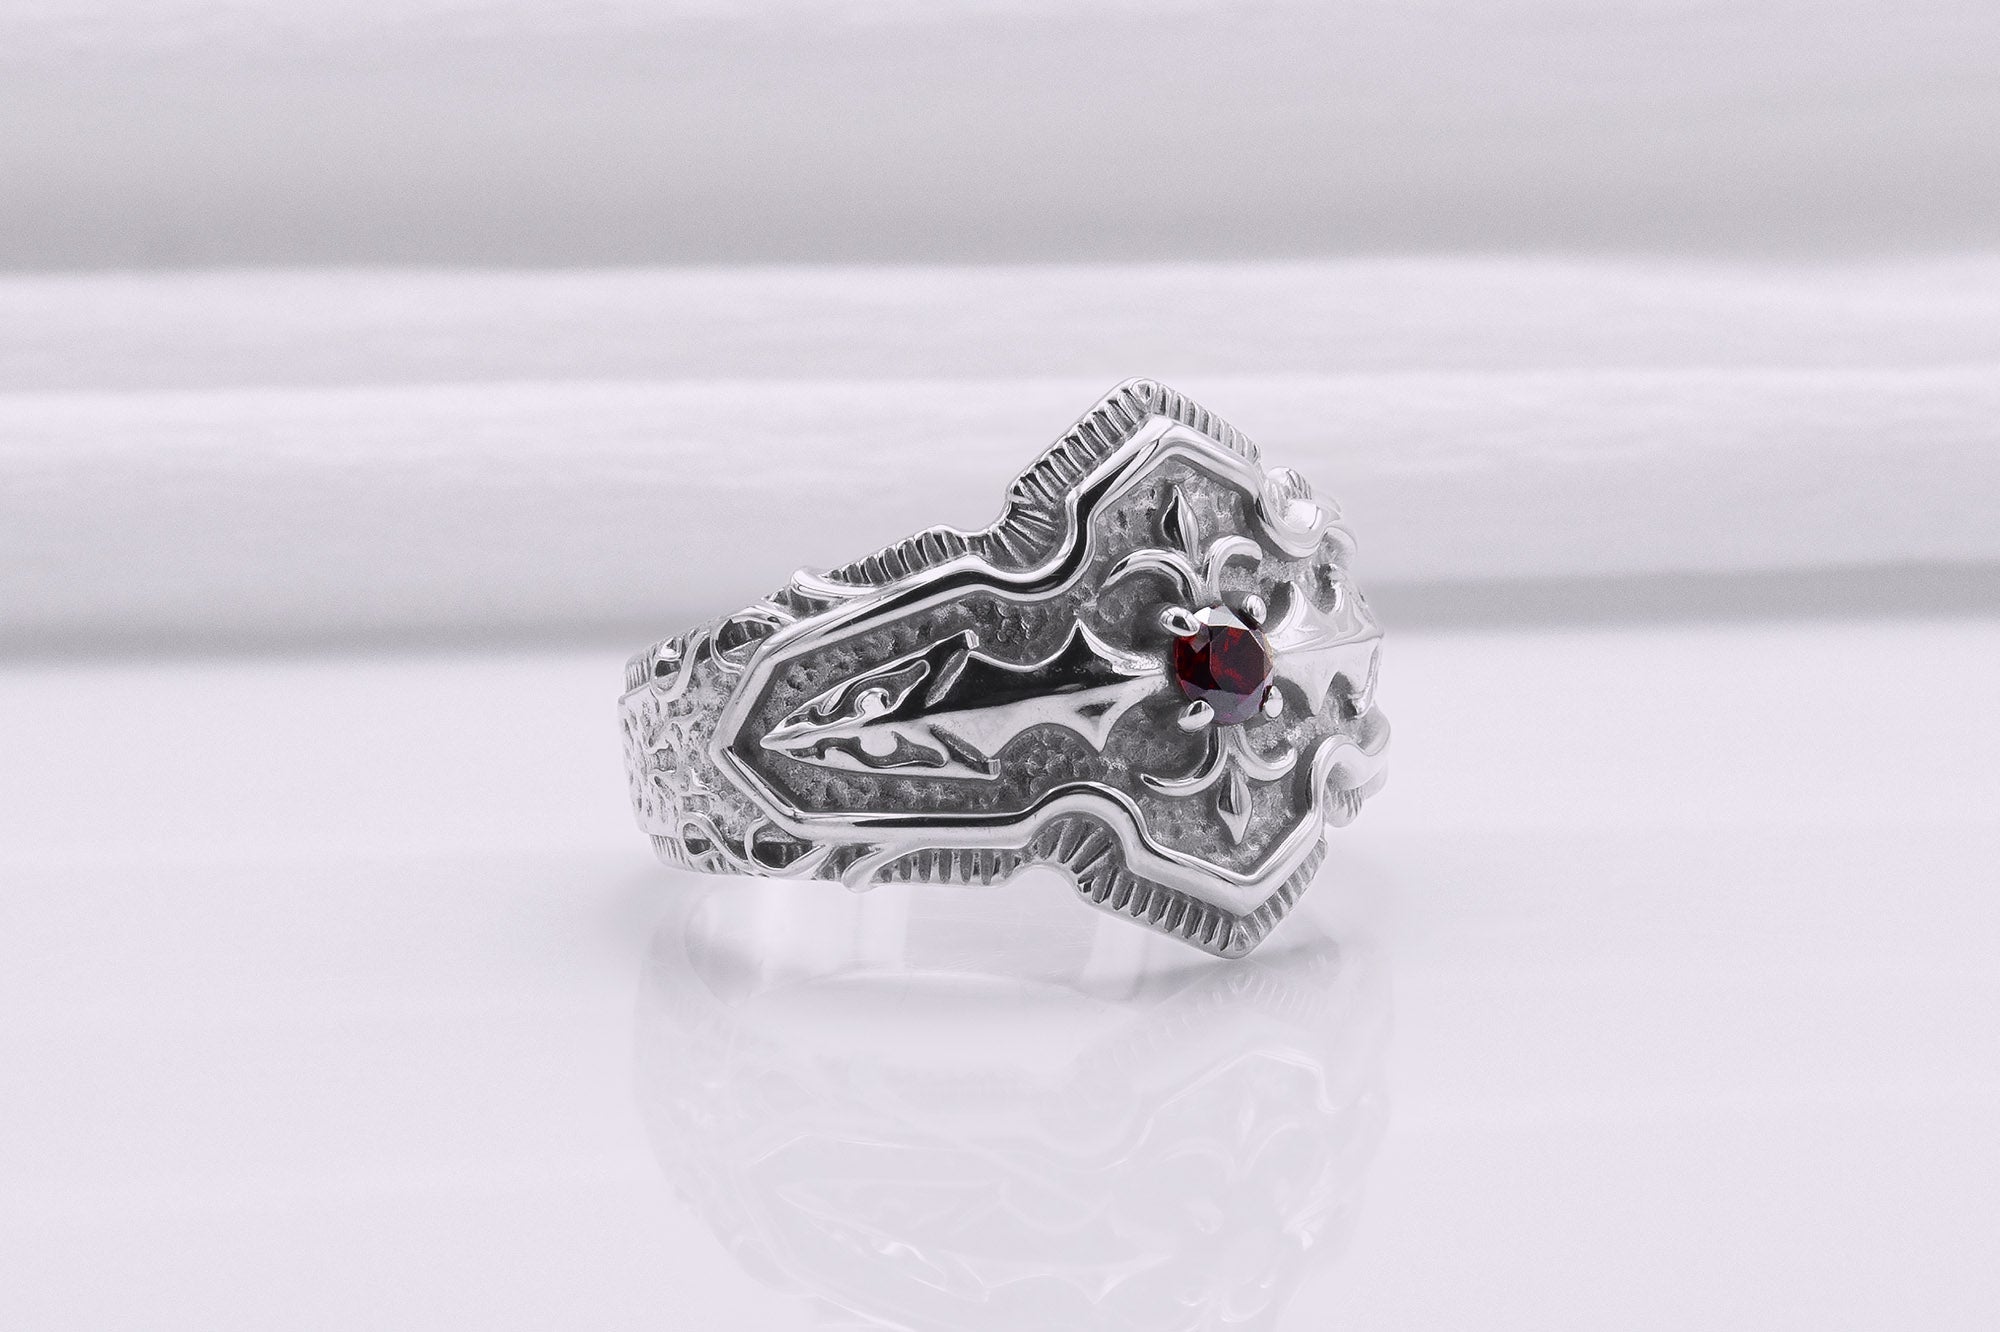 950 Platinum Ring with Red Cubic Zirconia, Handmade Fashion Jewelry